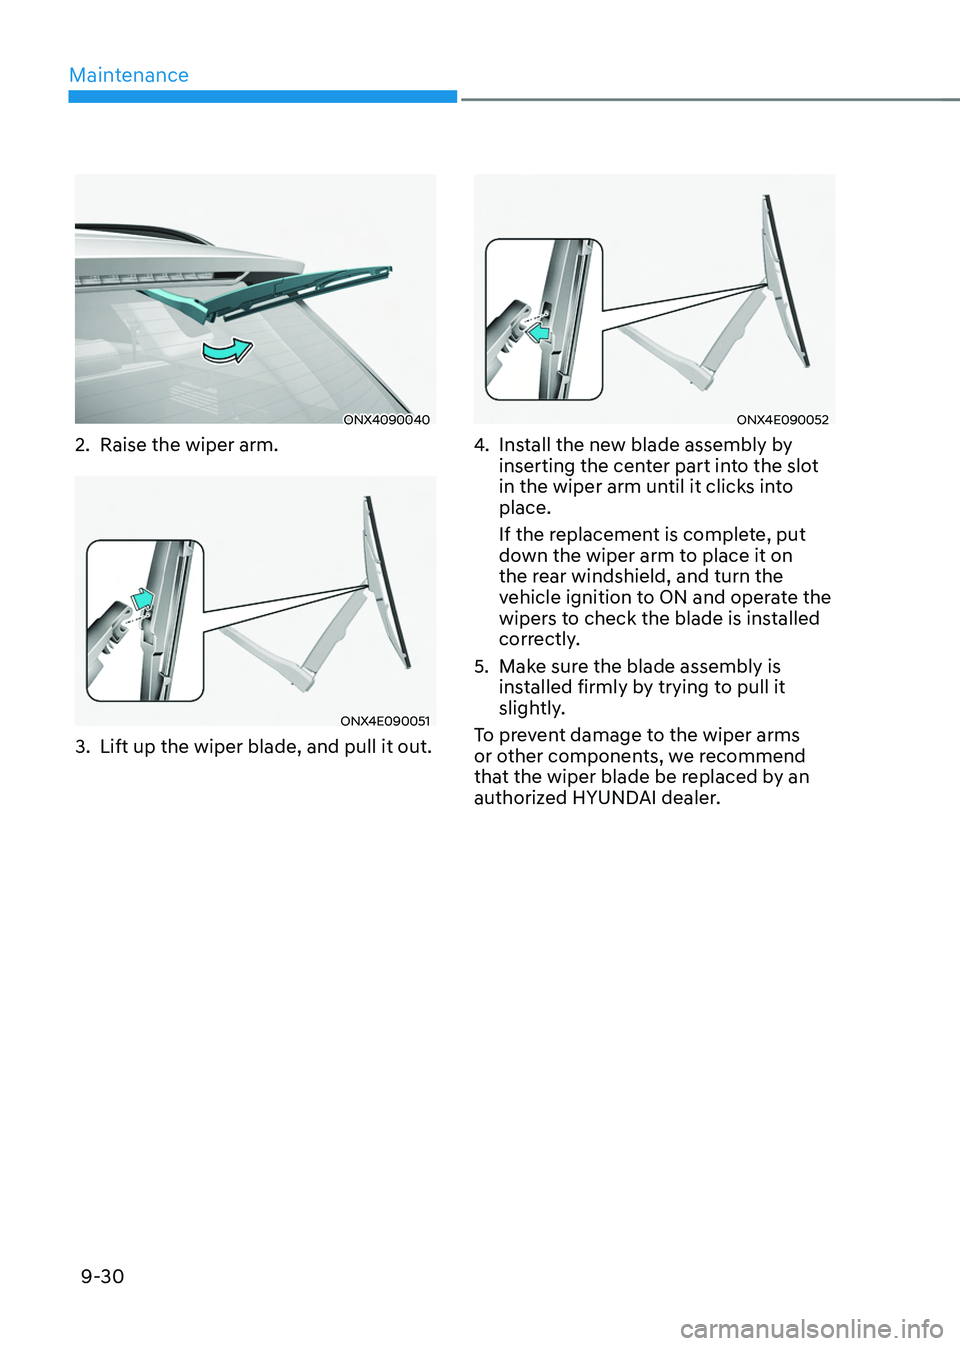 HYUNDAI TUCSON 2022 Service Manual Maintenance
9-30
ONX4090040
2. Raise the wiper arm.
ONX4E090051
3. Lift up the wiper blade, and pull it out.
ONX4E090052
4. Install the new blade assembly by 
inserting the center part into the slot 
